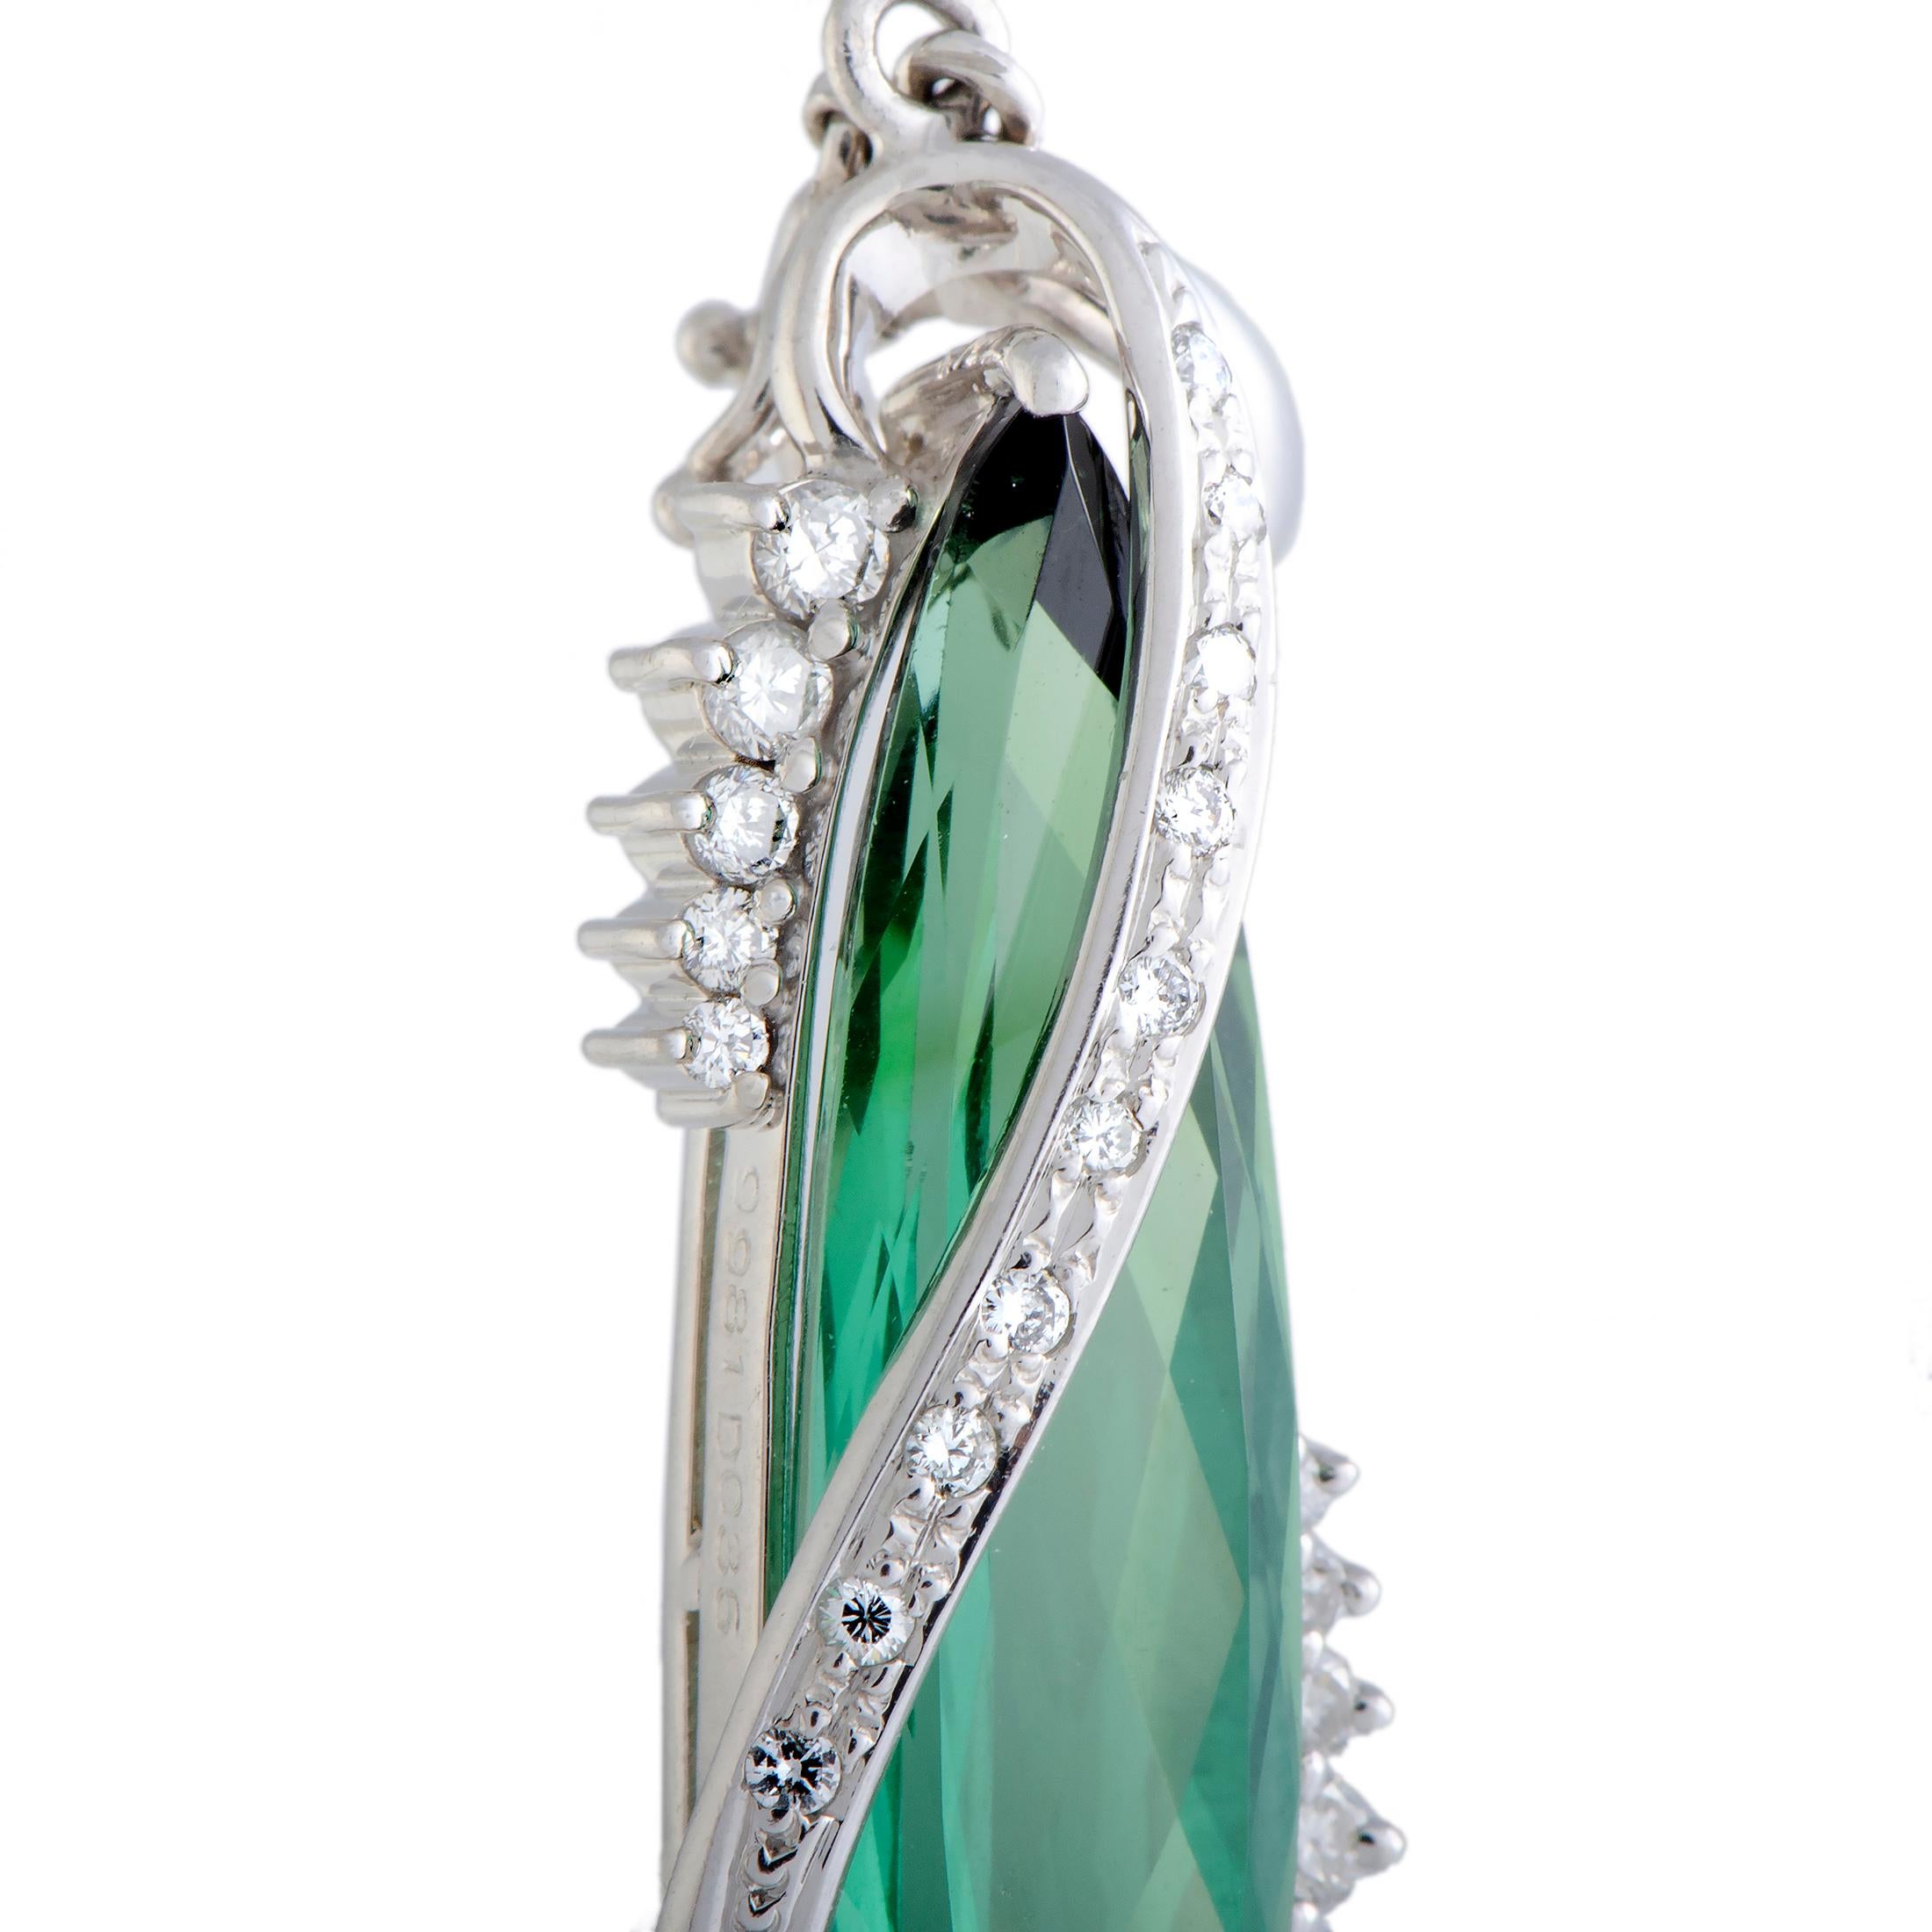 Sublime elegance and refined prestige are embodied in this superb pendant that will give a classy touch to any ensemble of yours. The pendant is wonderfully crafted from luxurious platinum and it boasts a stunning green tourmaline that weighs 9.98